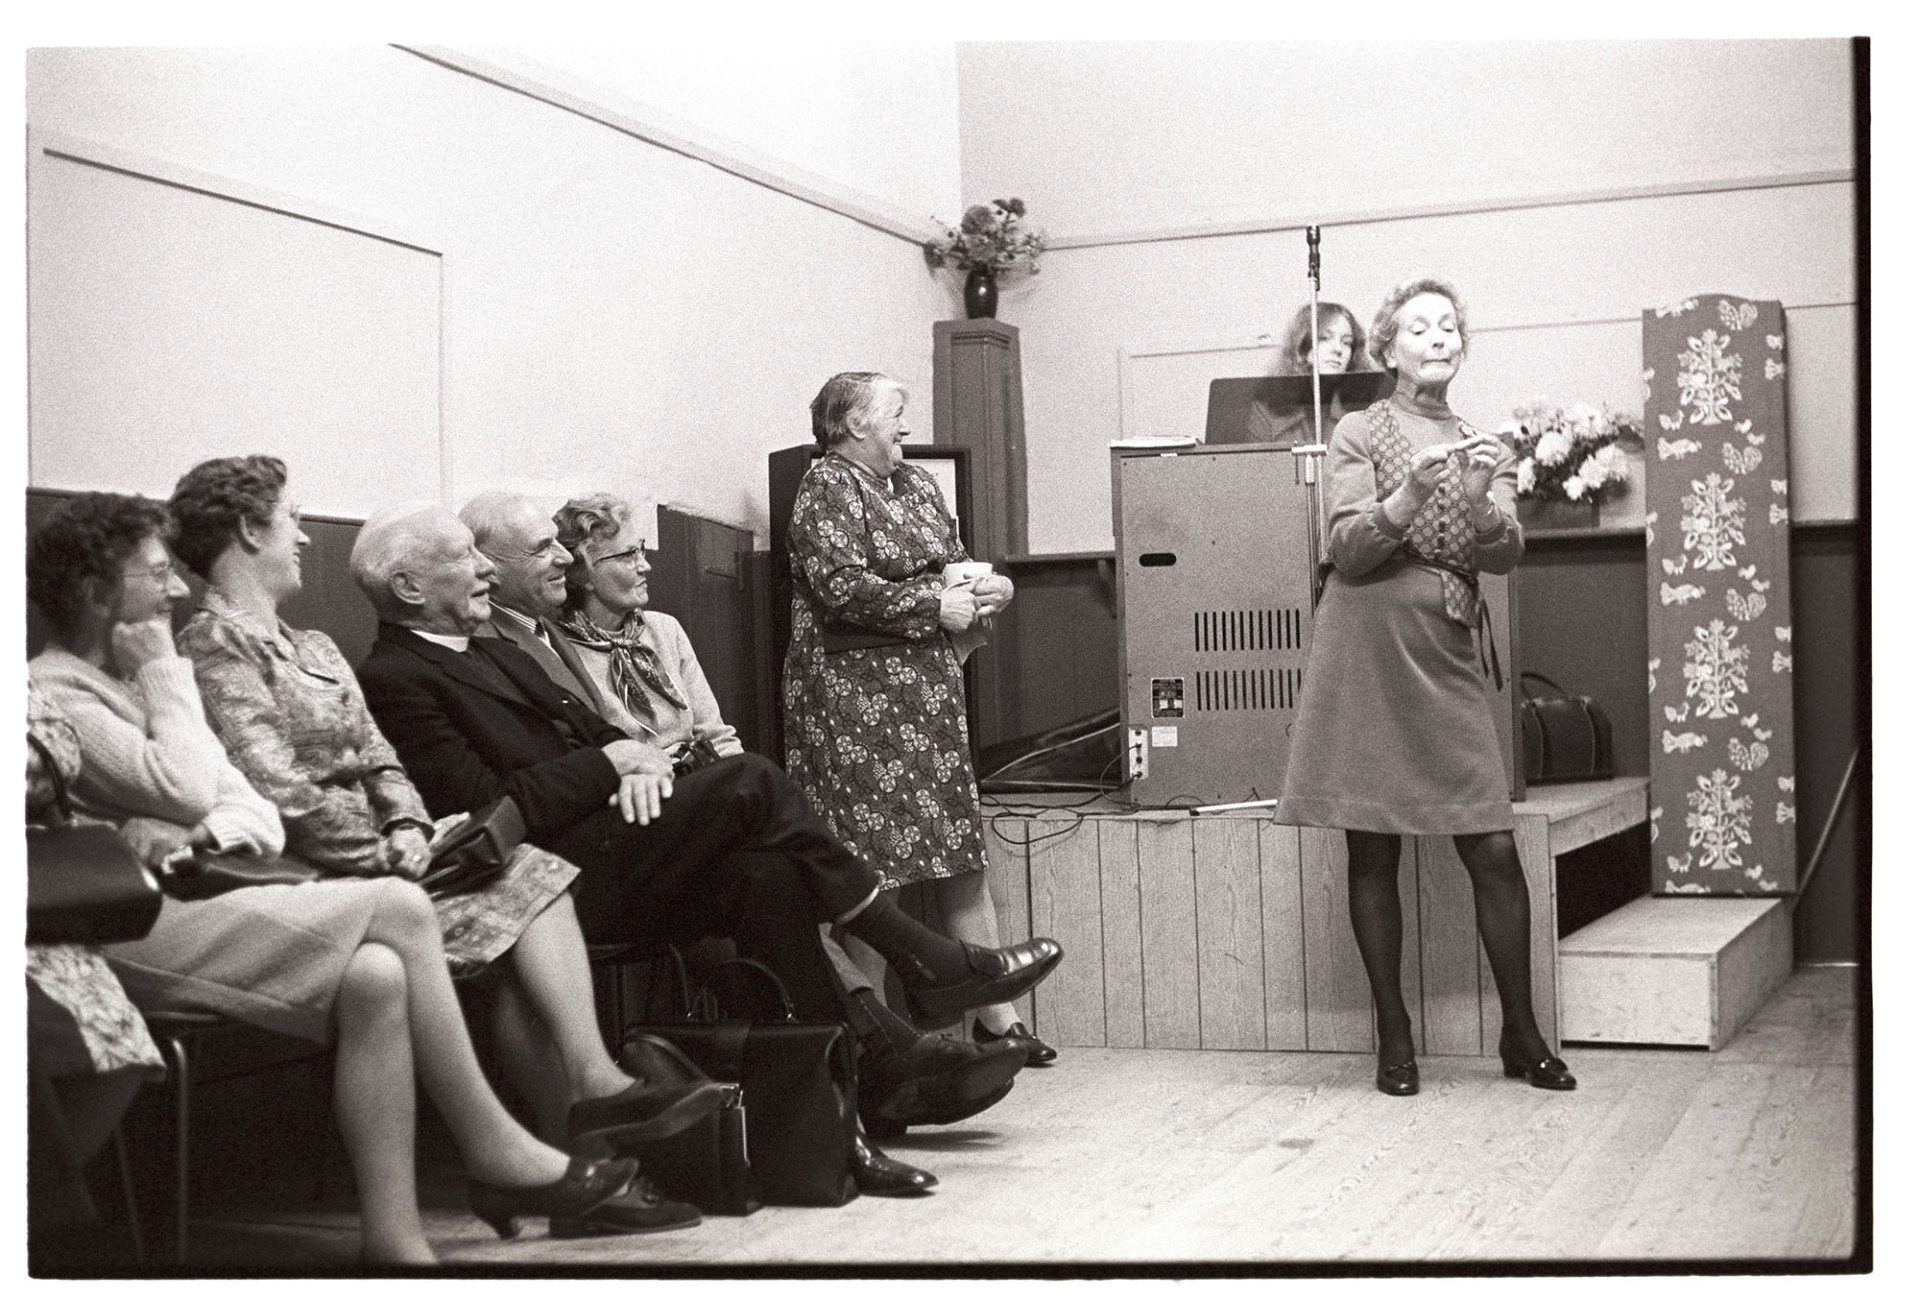 Entertainment at Harvest Supper in village hall.
[Reverend Wallington and other people watching Mrs Wallington perform a mime to entertain people at the Harvest Supper at Roborough Village Hall. A woman is stood up laughing by a small stage.]